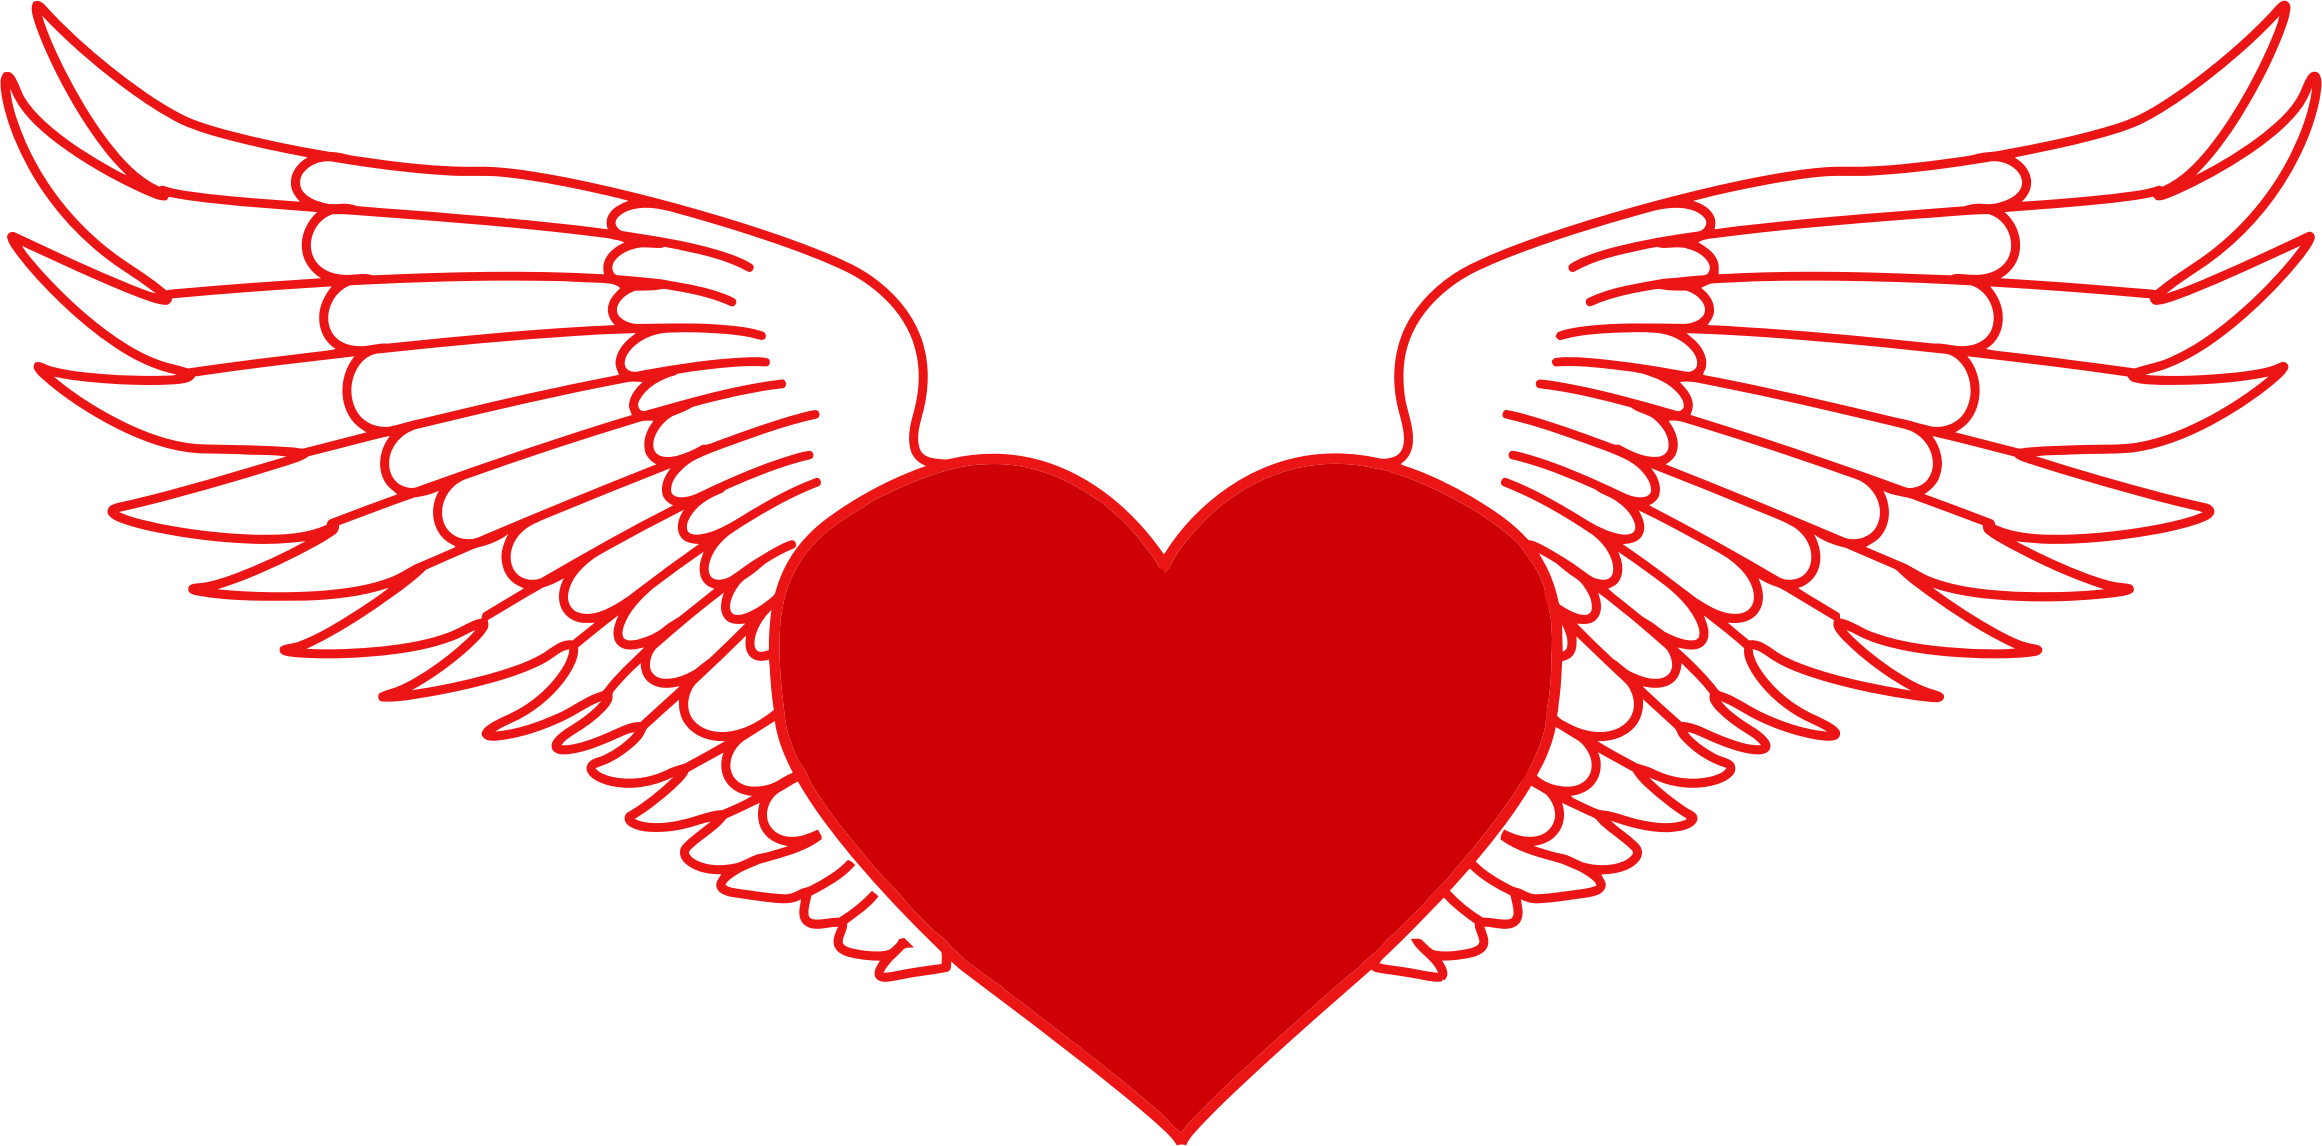 Wing clipart heart, Wing heart Transparent FREE for download.